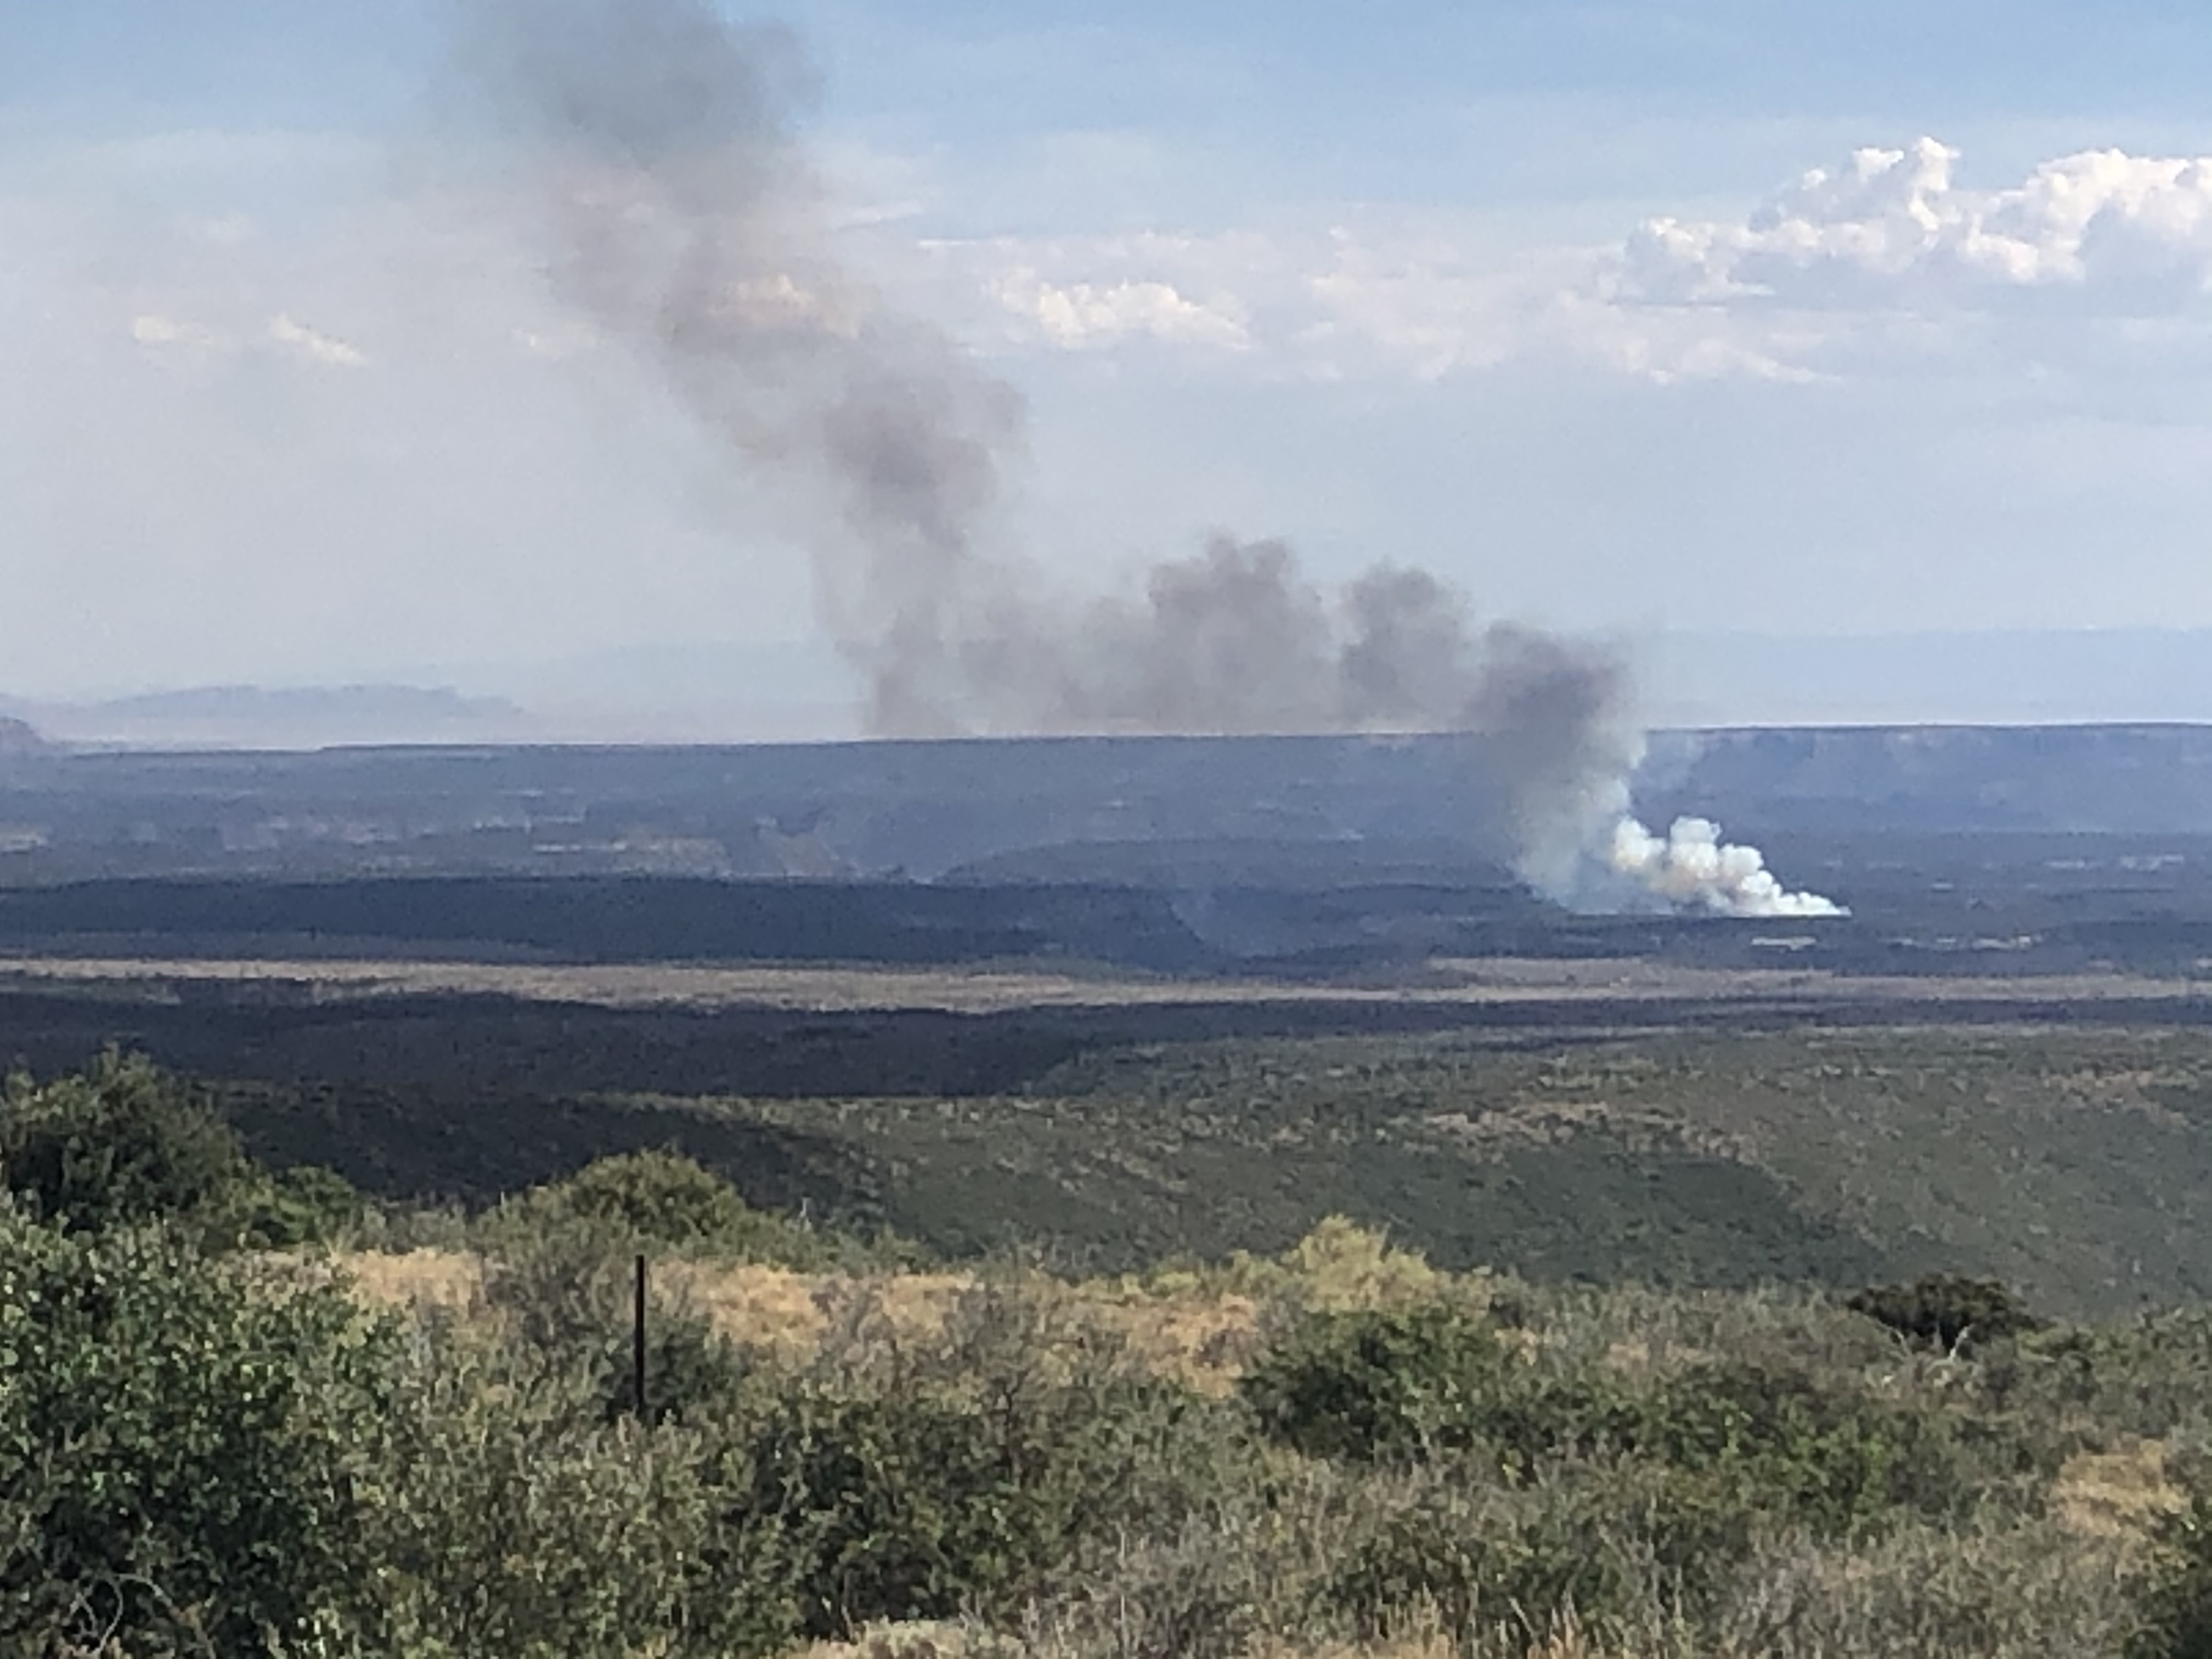 A plume of smoke rises from a canyon head, looking over the tilting landscape of Mesa Verde